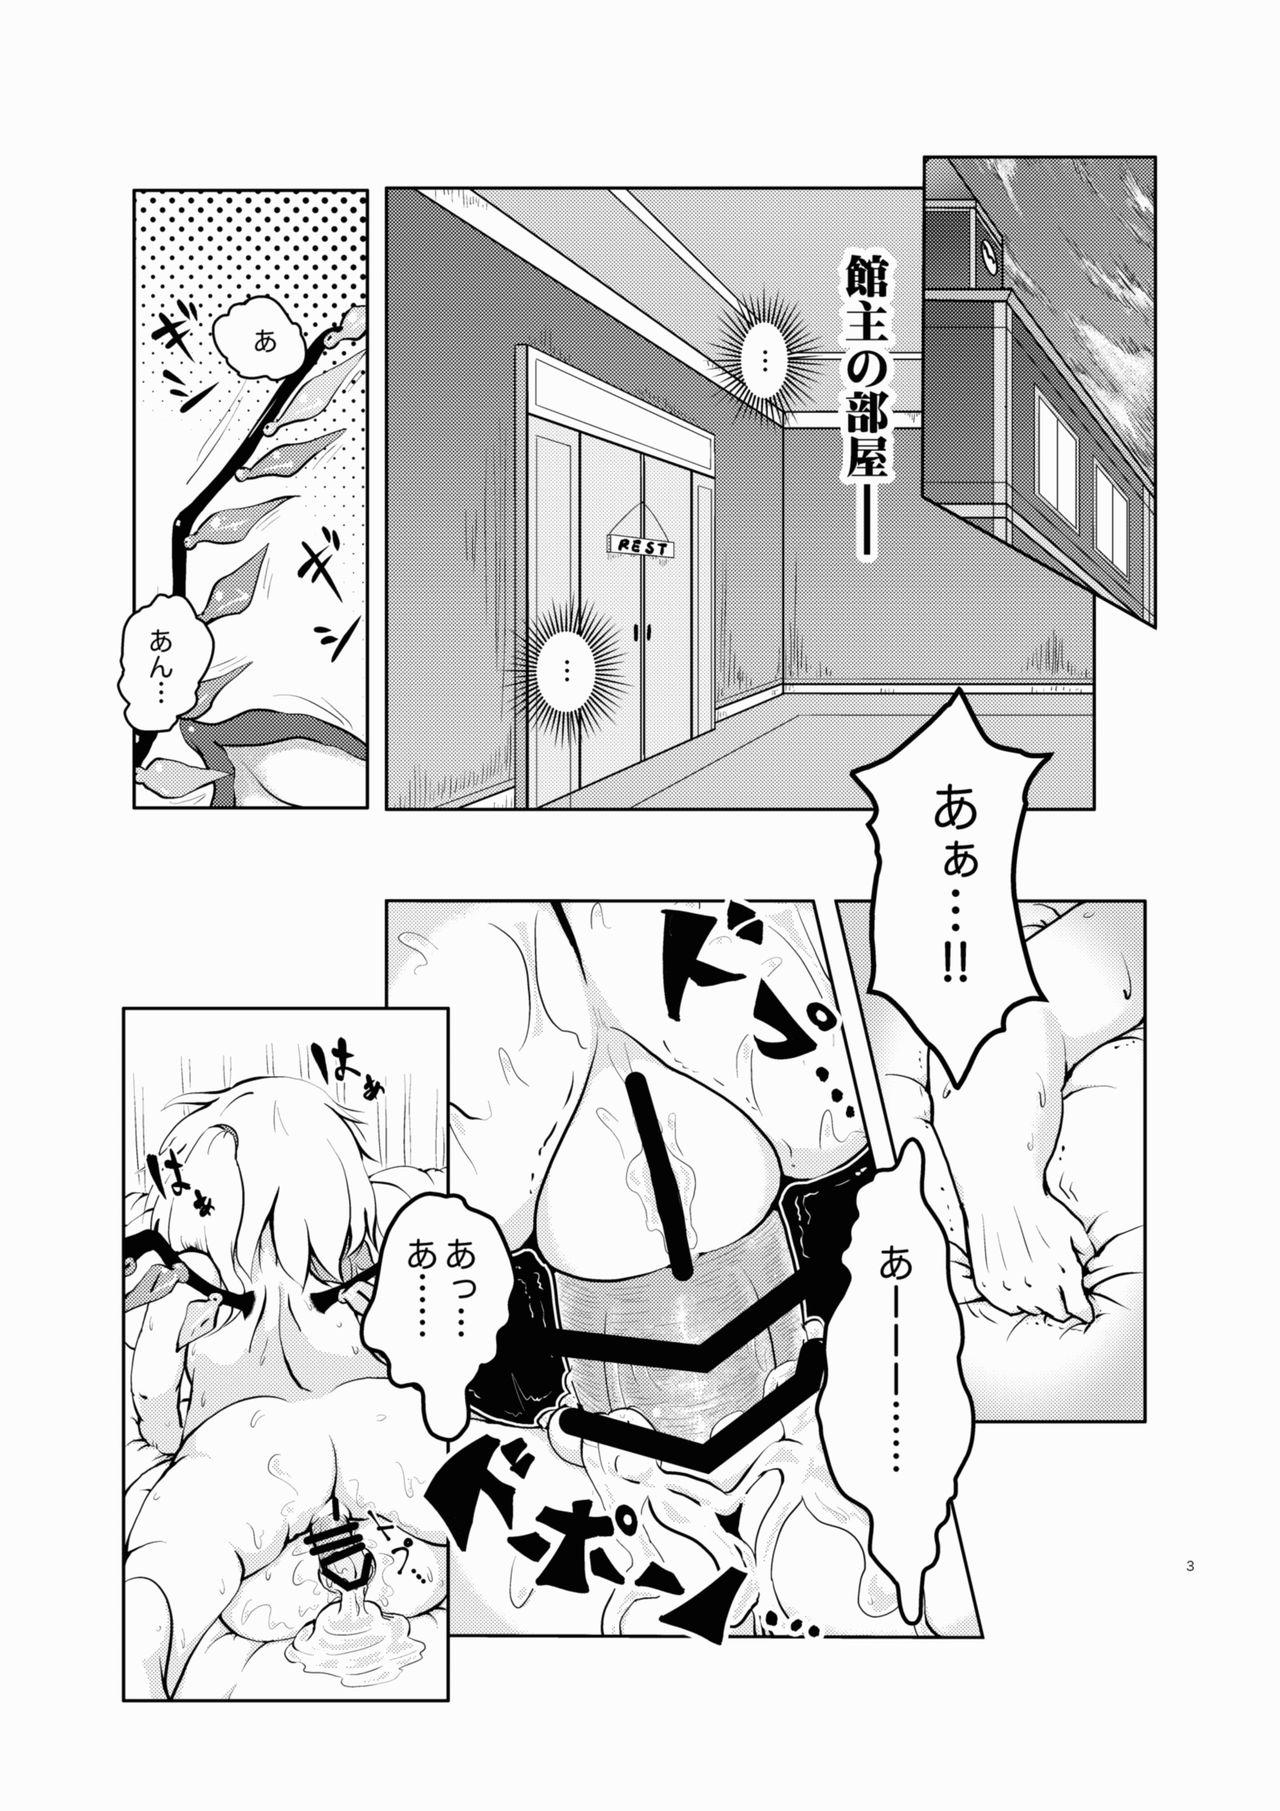 Periscope Scarlet Conflict 1 - Touhou project Short Hair - Page 3